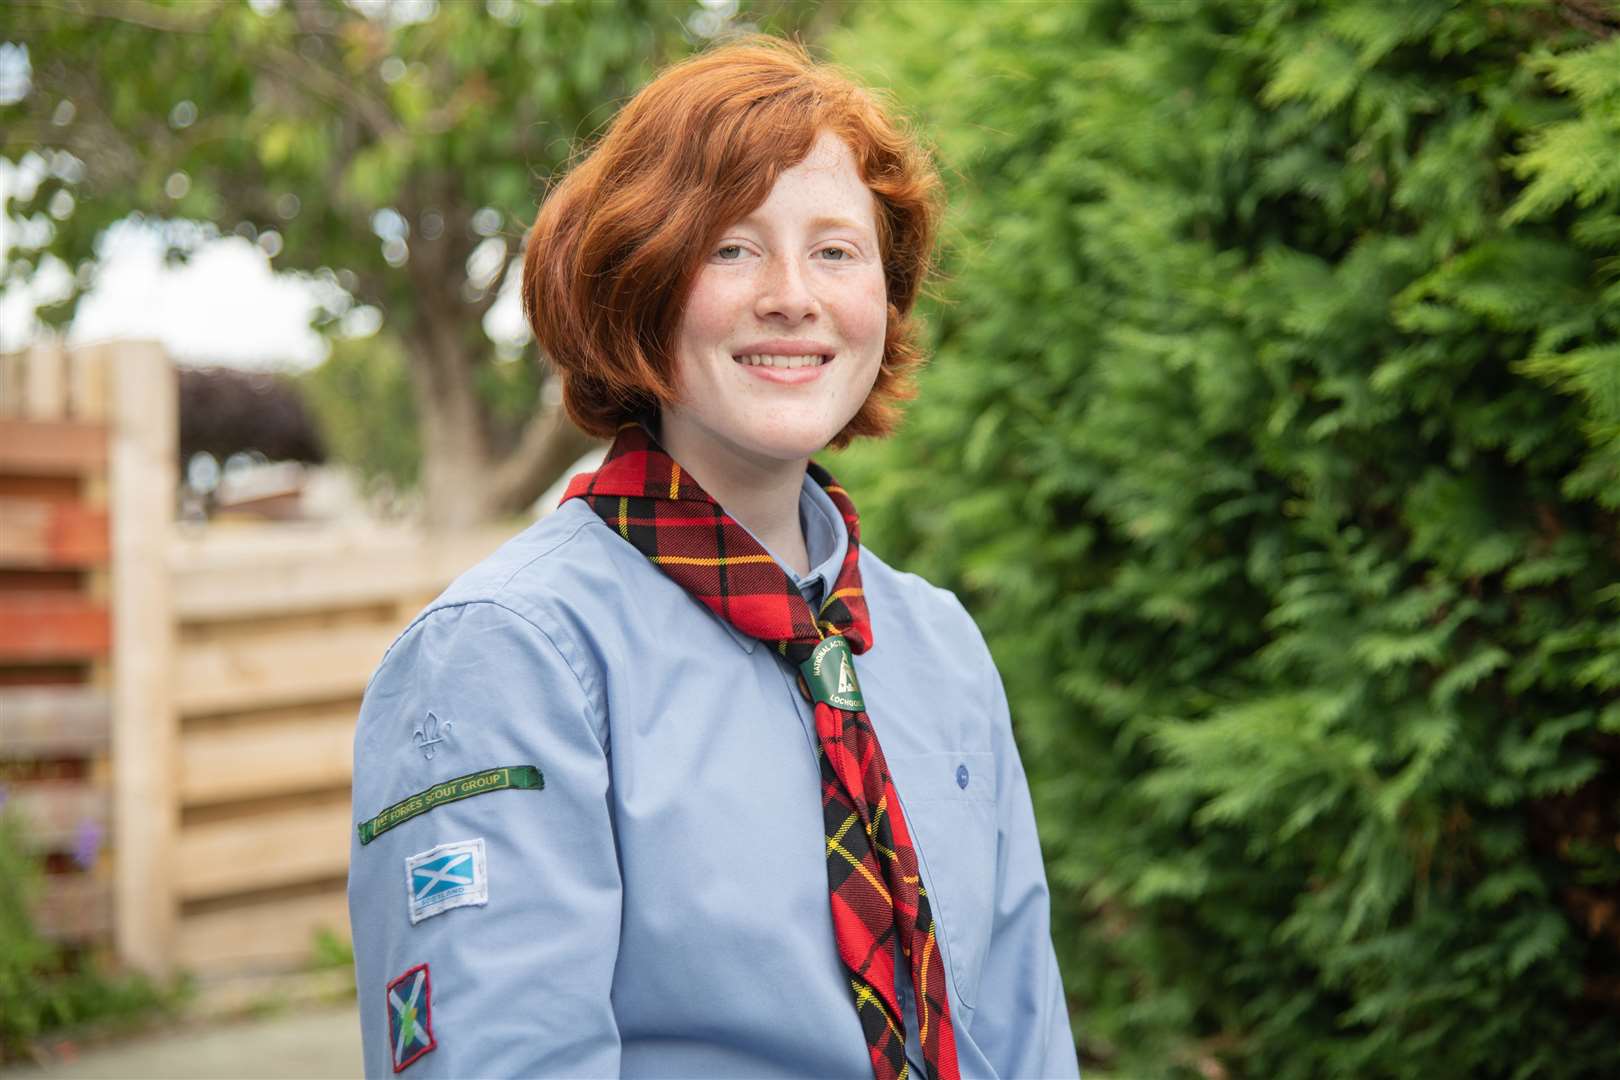 Rachael Ballingall will attend the Scout Jamboree in South Korea. Picture: Daniel Forsyth